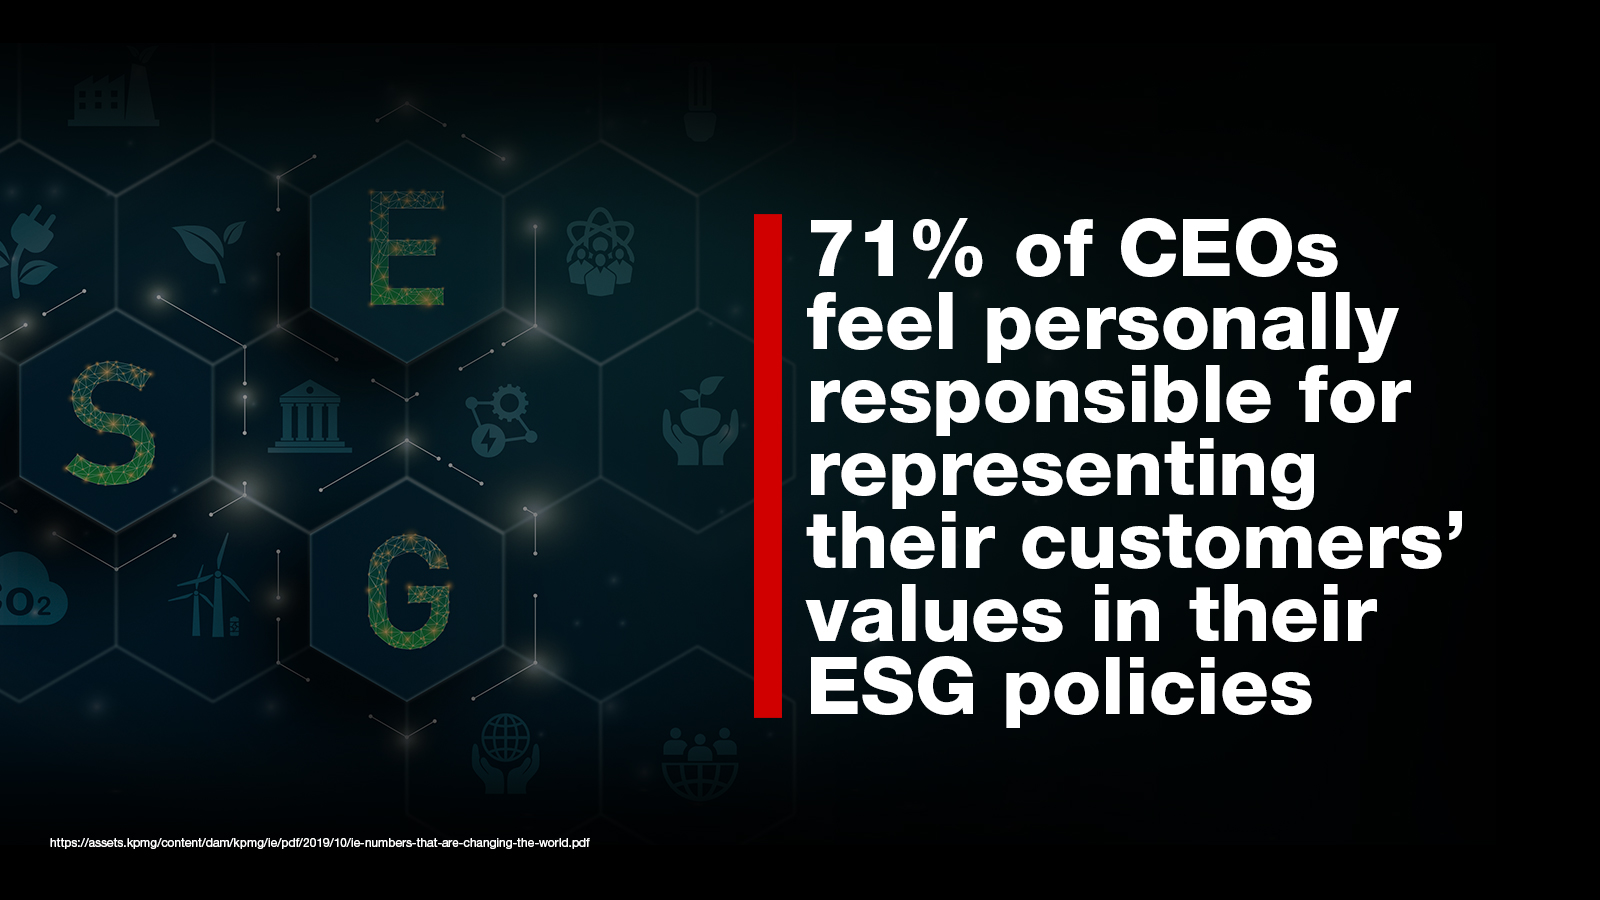 71% of CEOs feel personally responsible for representing customers' values in ESG policies